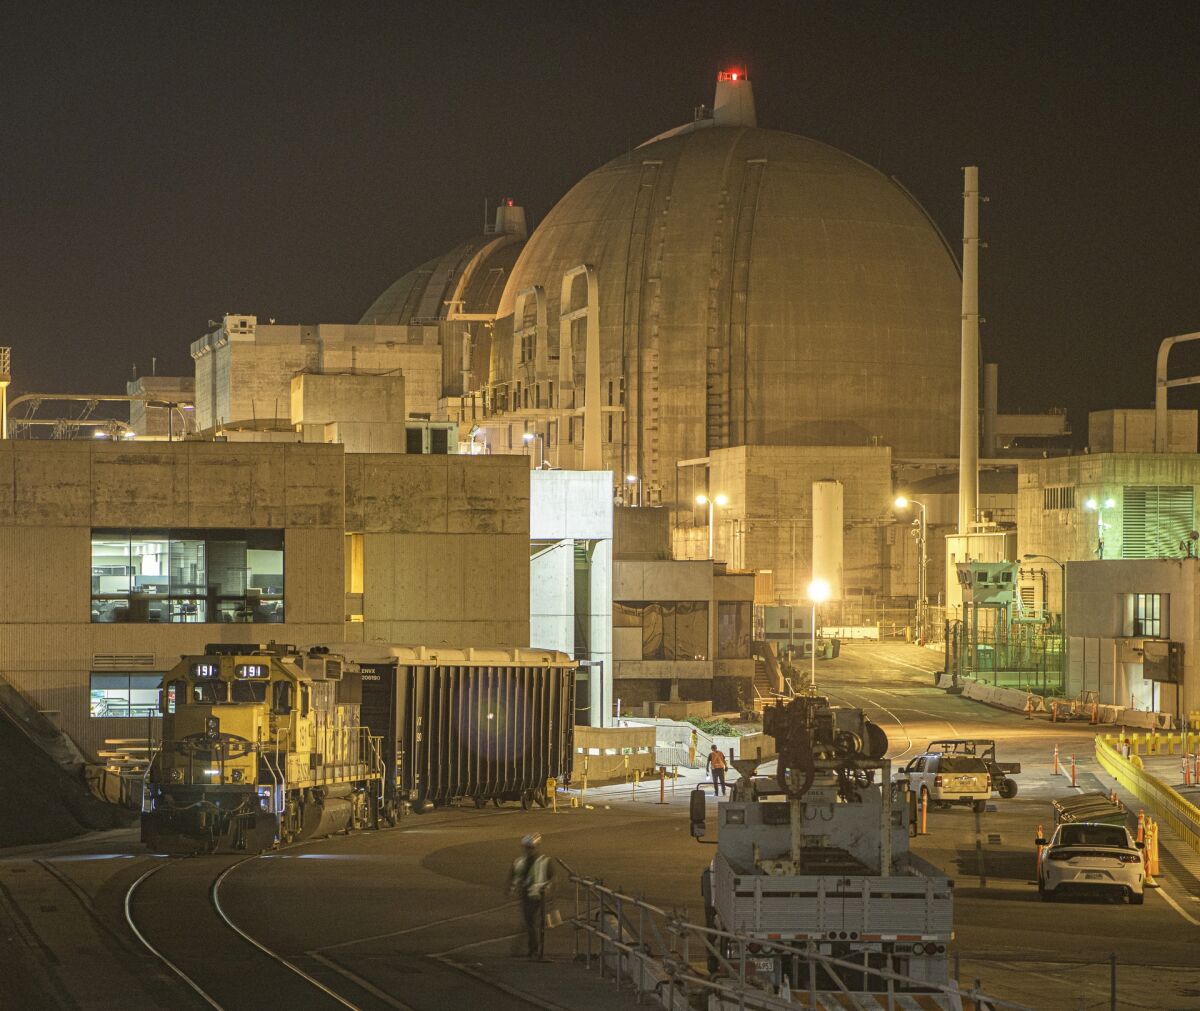 Dismantlement efforts at the San Onofre Nuclear Generating Station.